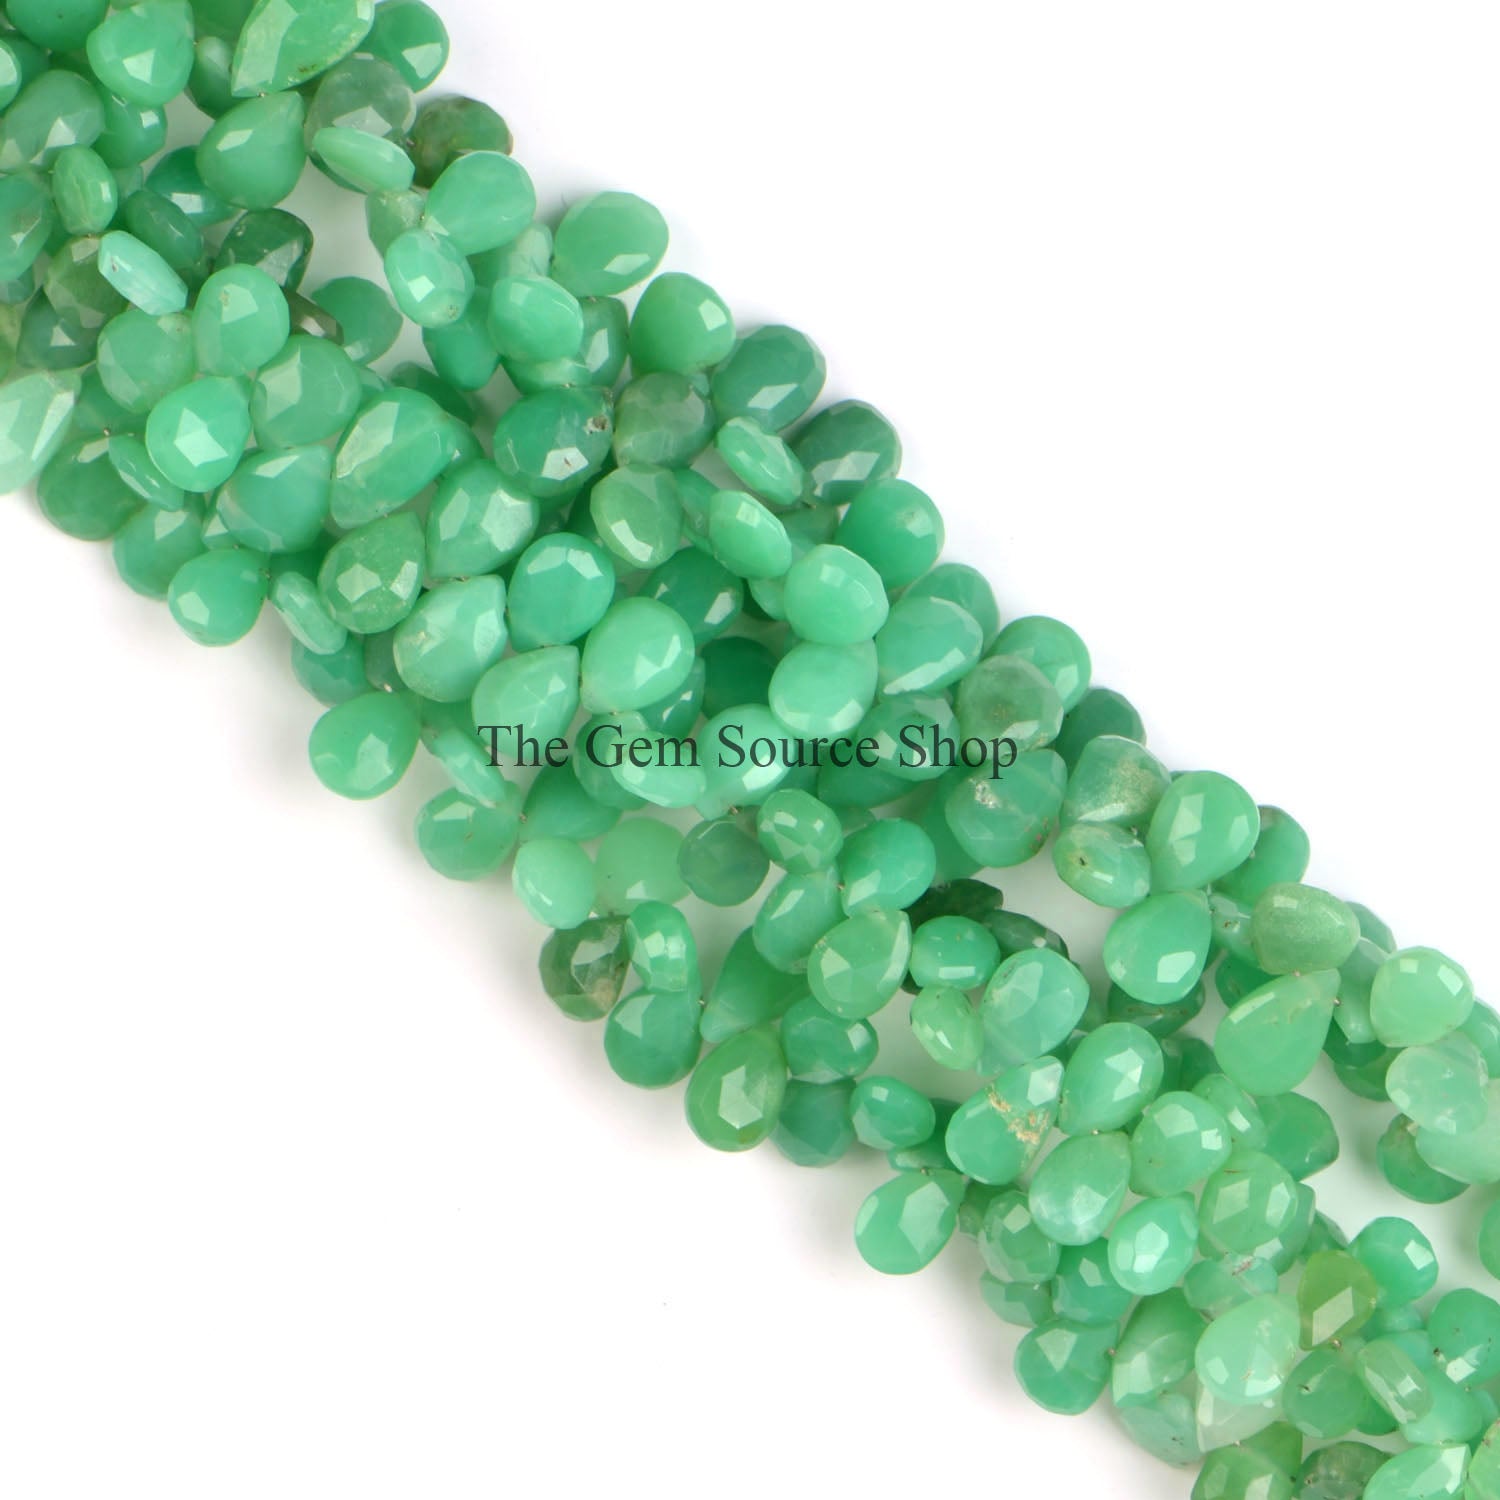 Chrysoprase Faceted Beads, Chrysoprase Pear Shape Beads, Chrysoprase Gemstone Beads